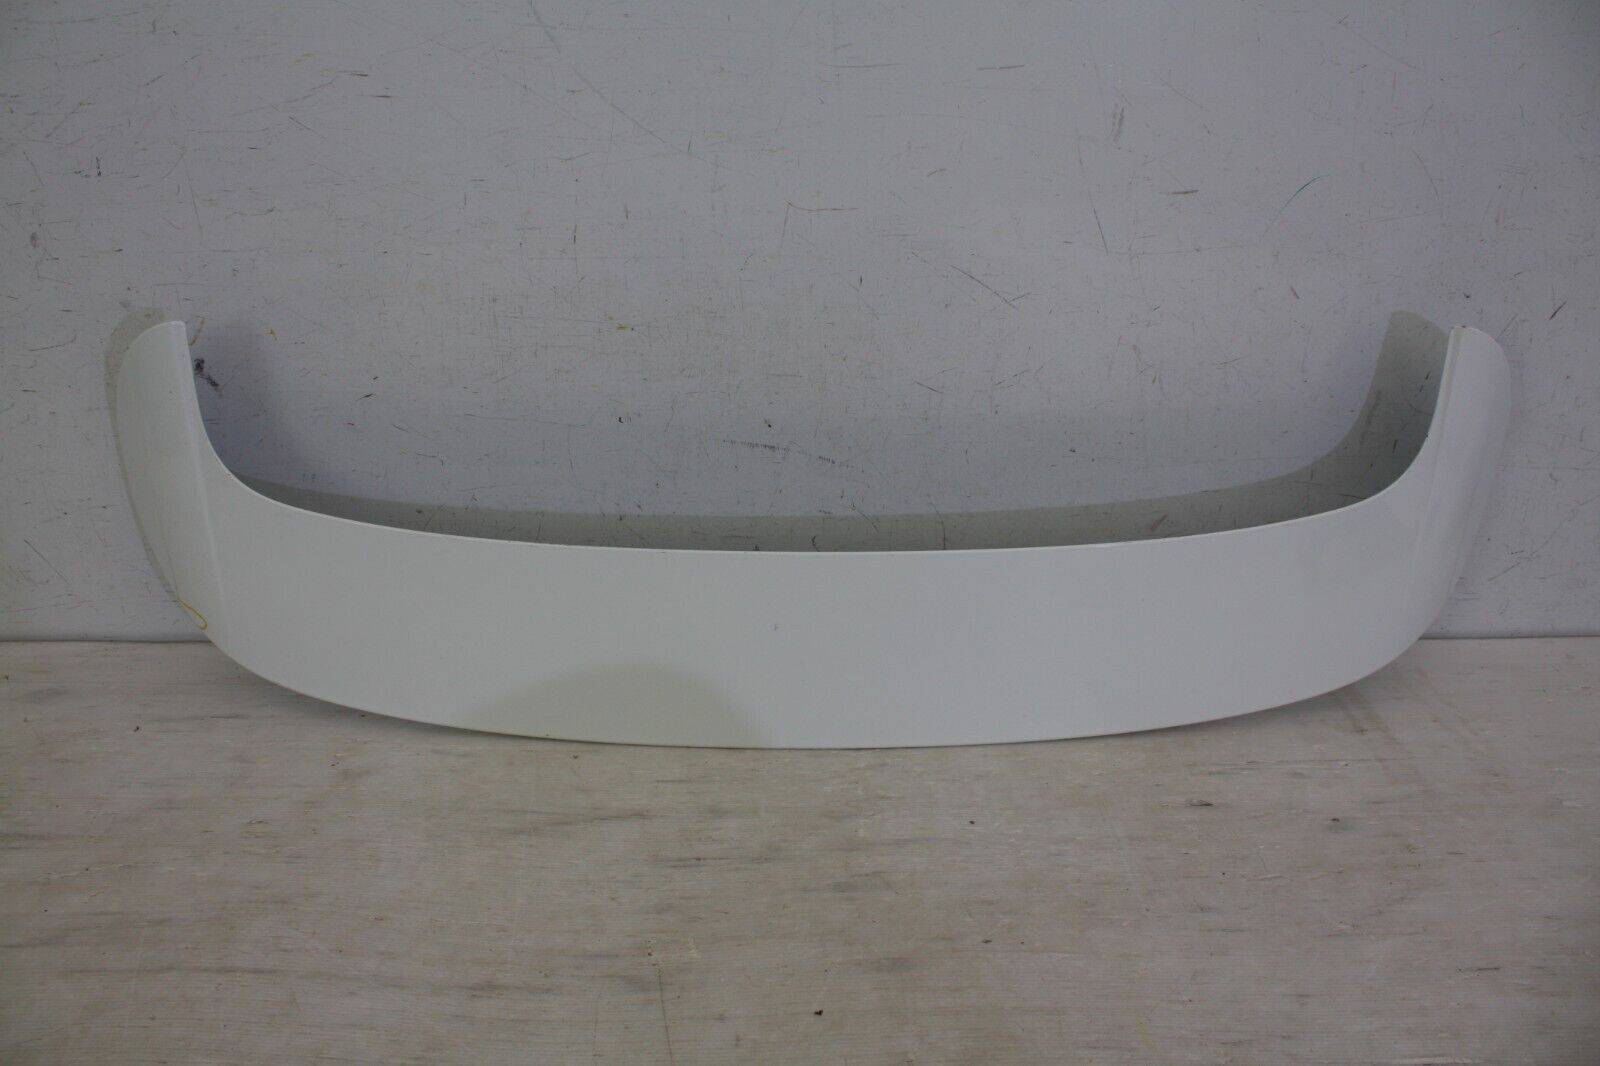 Ford Fiesta Rear Tailgate Boot Lid Spoiler 2017 to 2022 H1BB A44210 A Genuine 176008239176